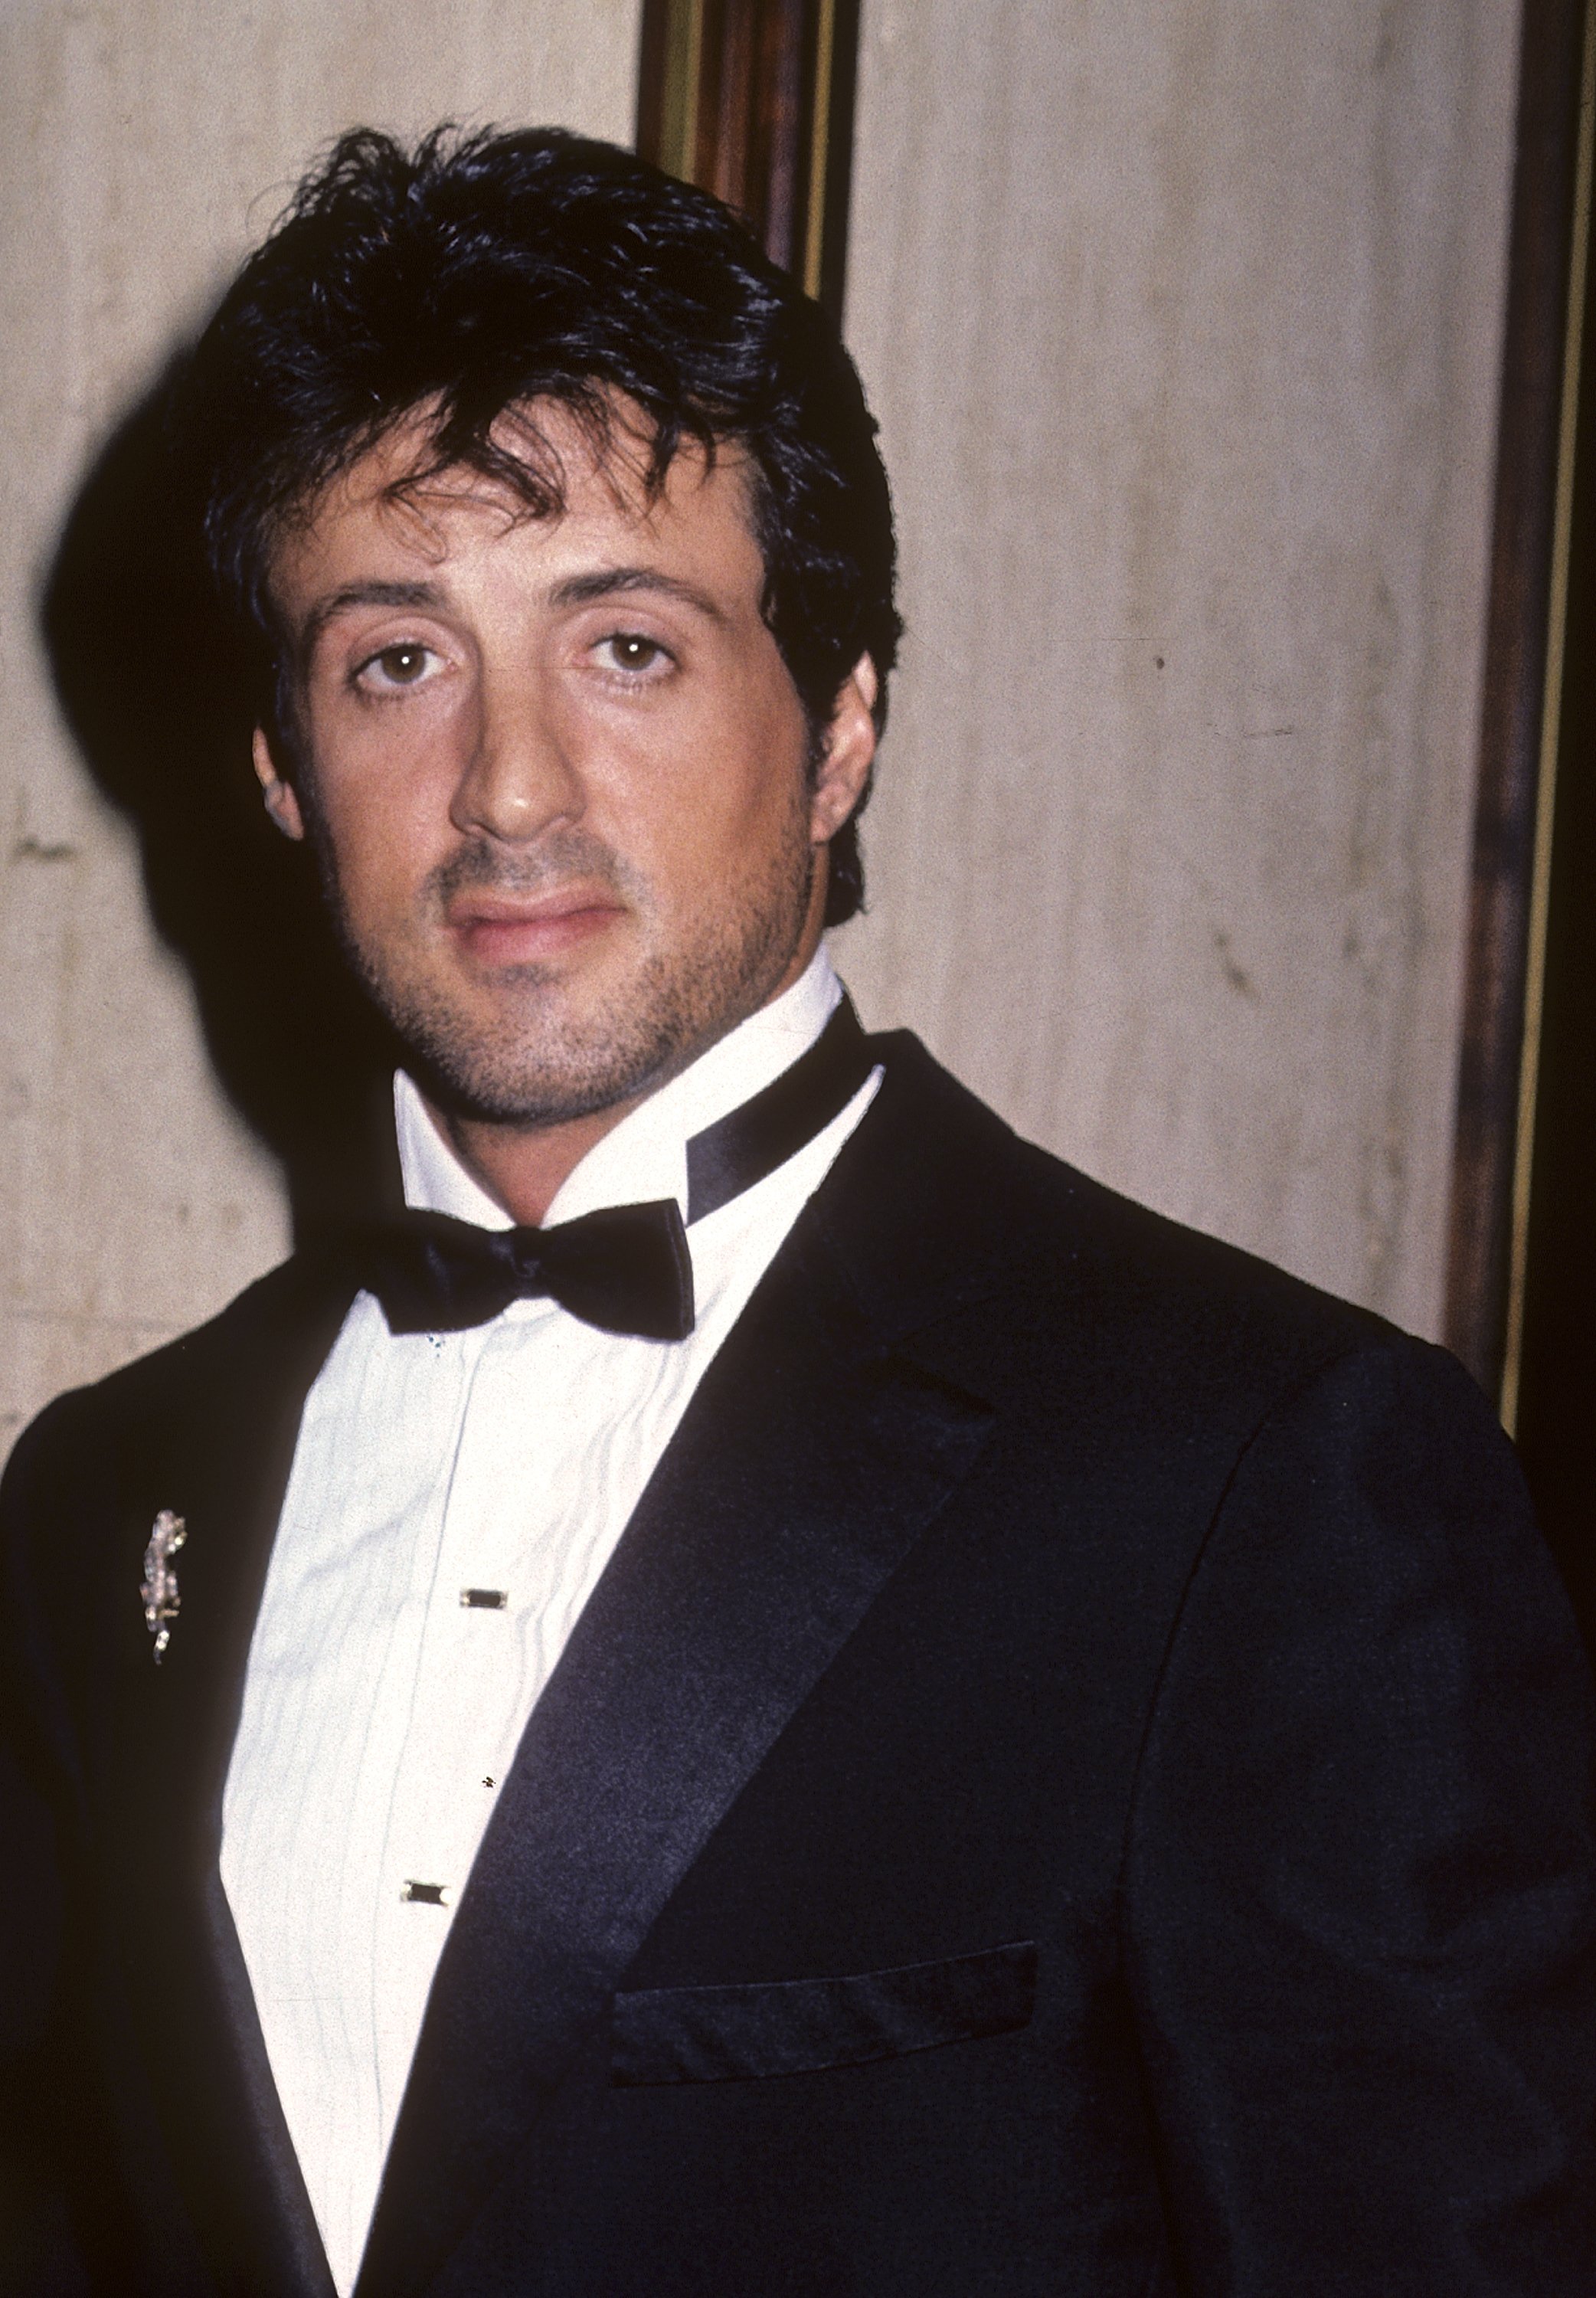 Sylvester Stallone at the American Friends of Hebrew University's 16th Annual Scopus Award Salute to Peter V. Ueberroth on December 5, 1985, in Century City, California. | Source: Getty Images